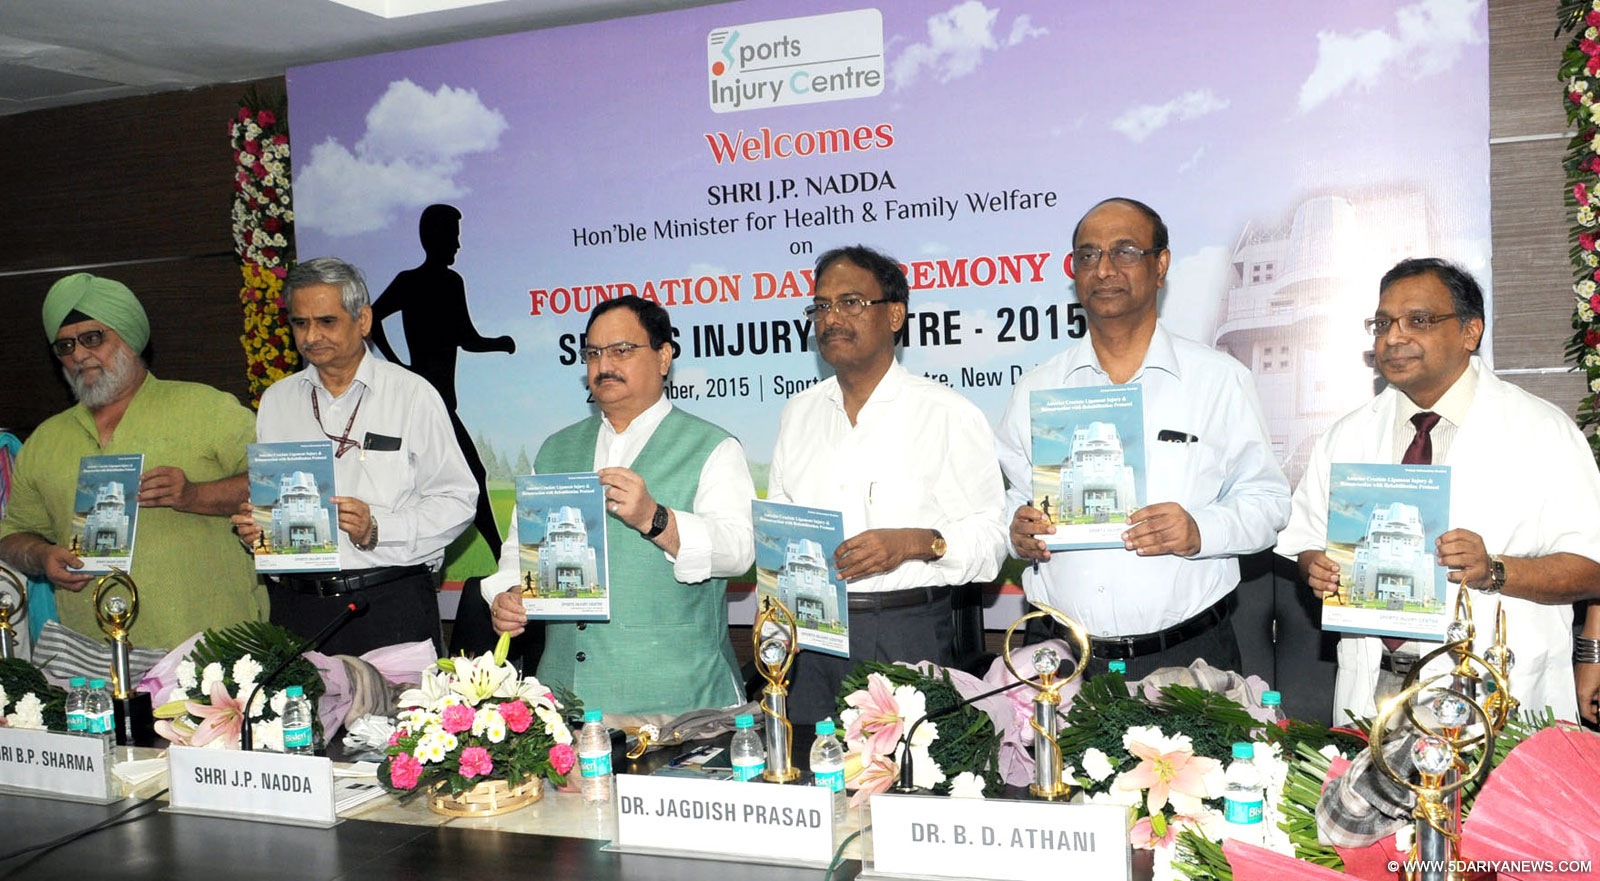 The Union Minister for Health & Family Welfare, Shri J.P. Nadda releasing the “Patient Information Booklet” to mark the 5th Foundation Day of the Sports Injury Centre, Safdarjung Hospital, in New Delhi on September 26, 2015. The Secretary, Ministry of Health and Family Welfare, Shri B.P. Sharma, the DGHS, Dr. (Prof.) Jagdish Prasad and other dignitaries are also seen.